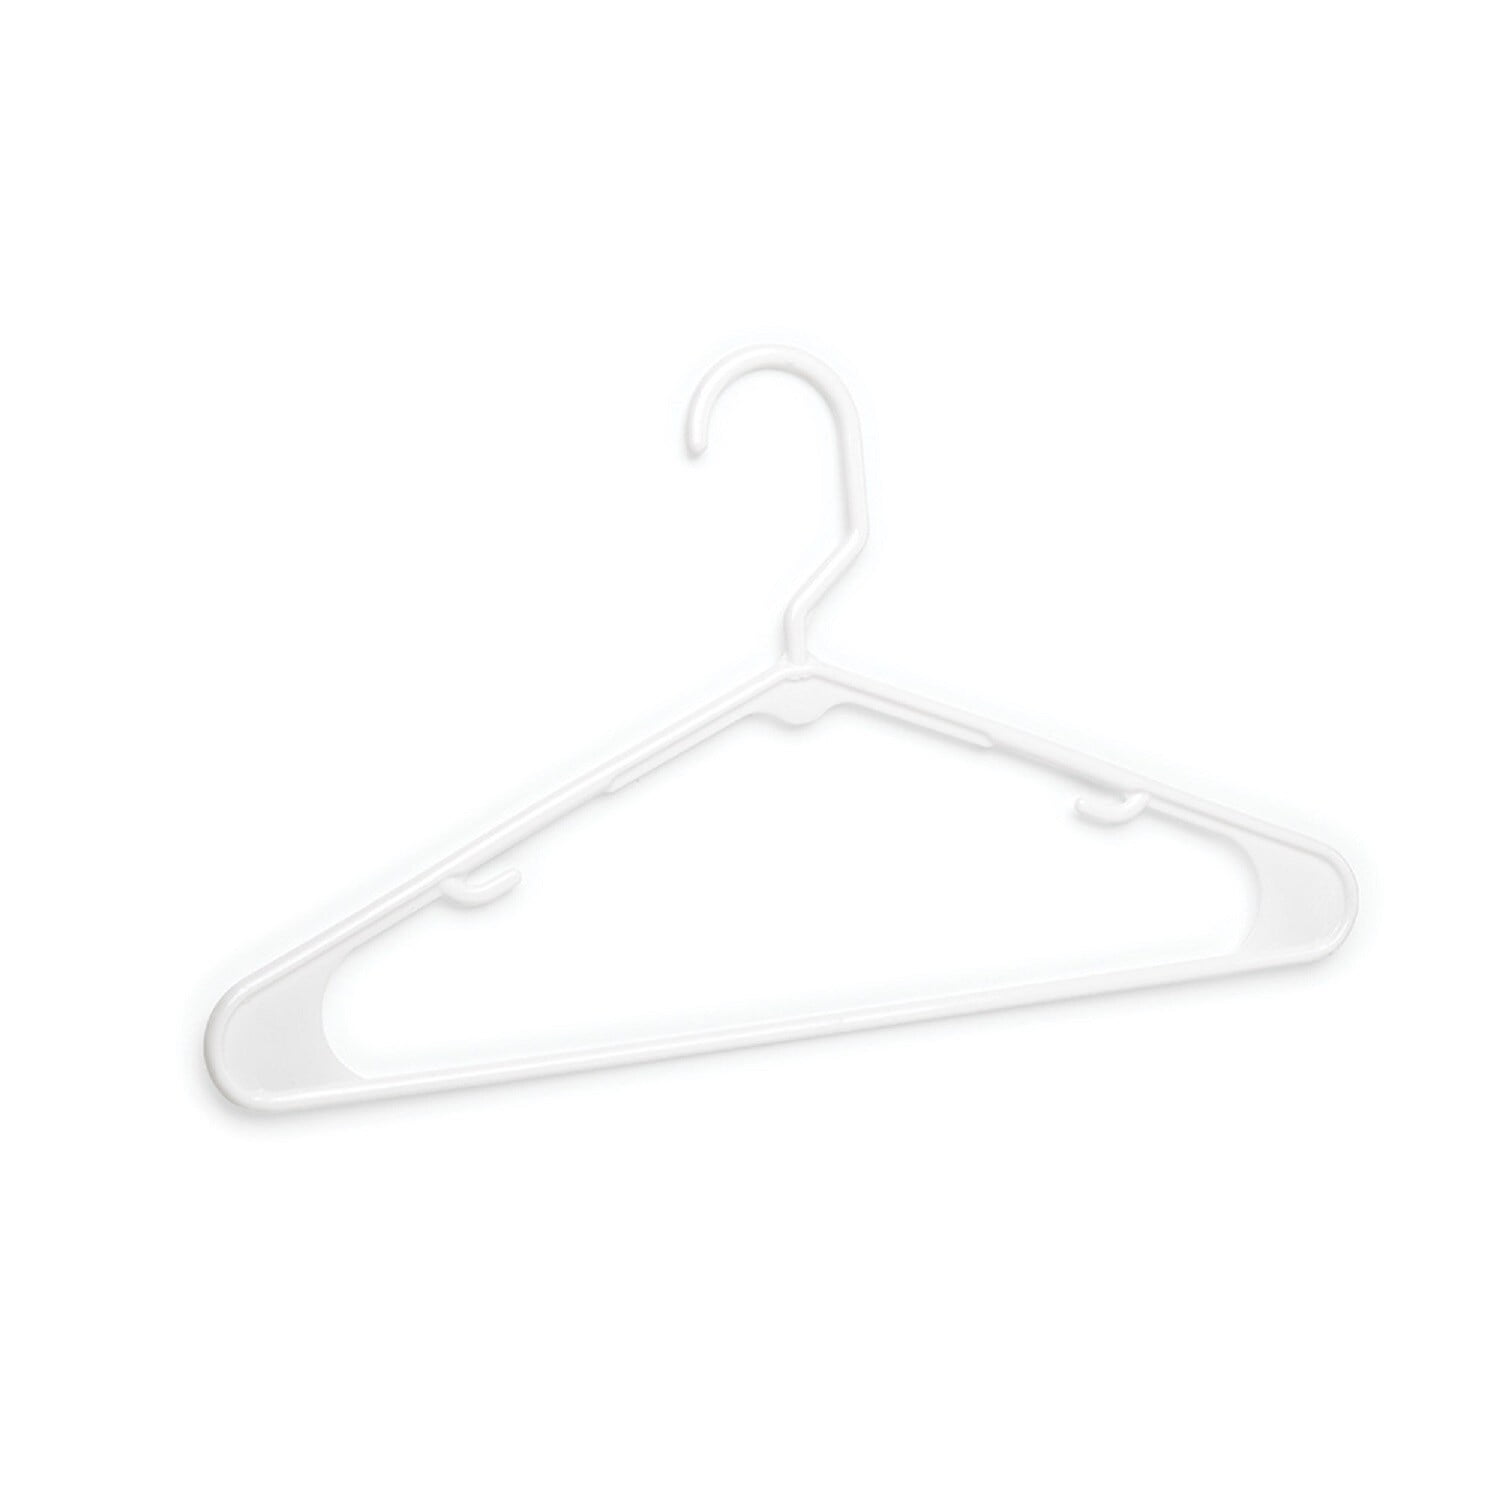 China Hometime Factory Thin Hangers Suppliers Wholesale Clear